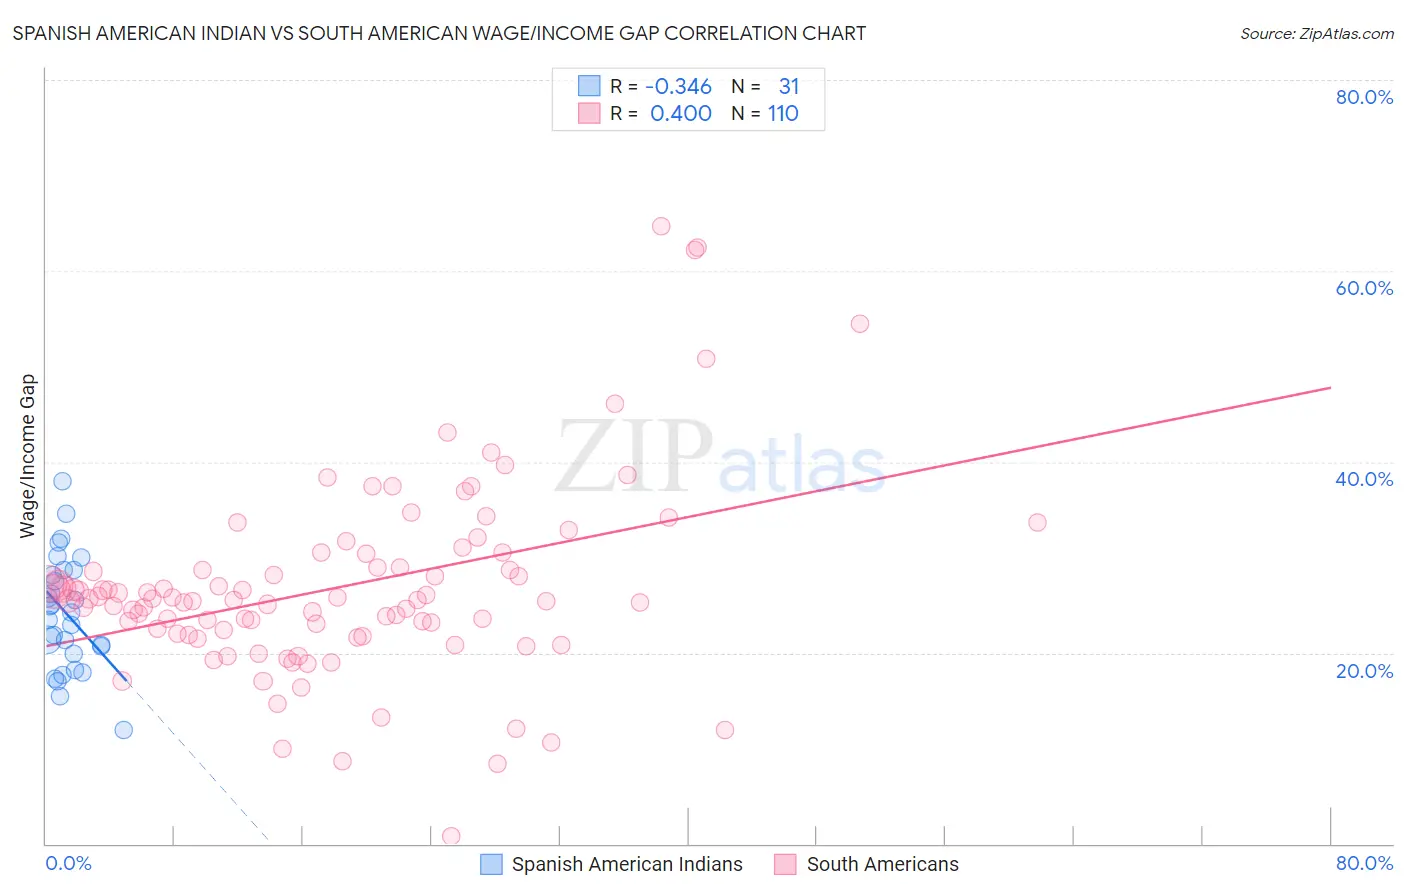 Spanish American Indian vs South American Wage/Income Gap